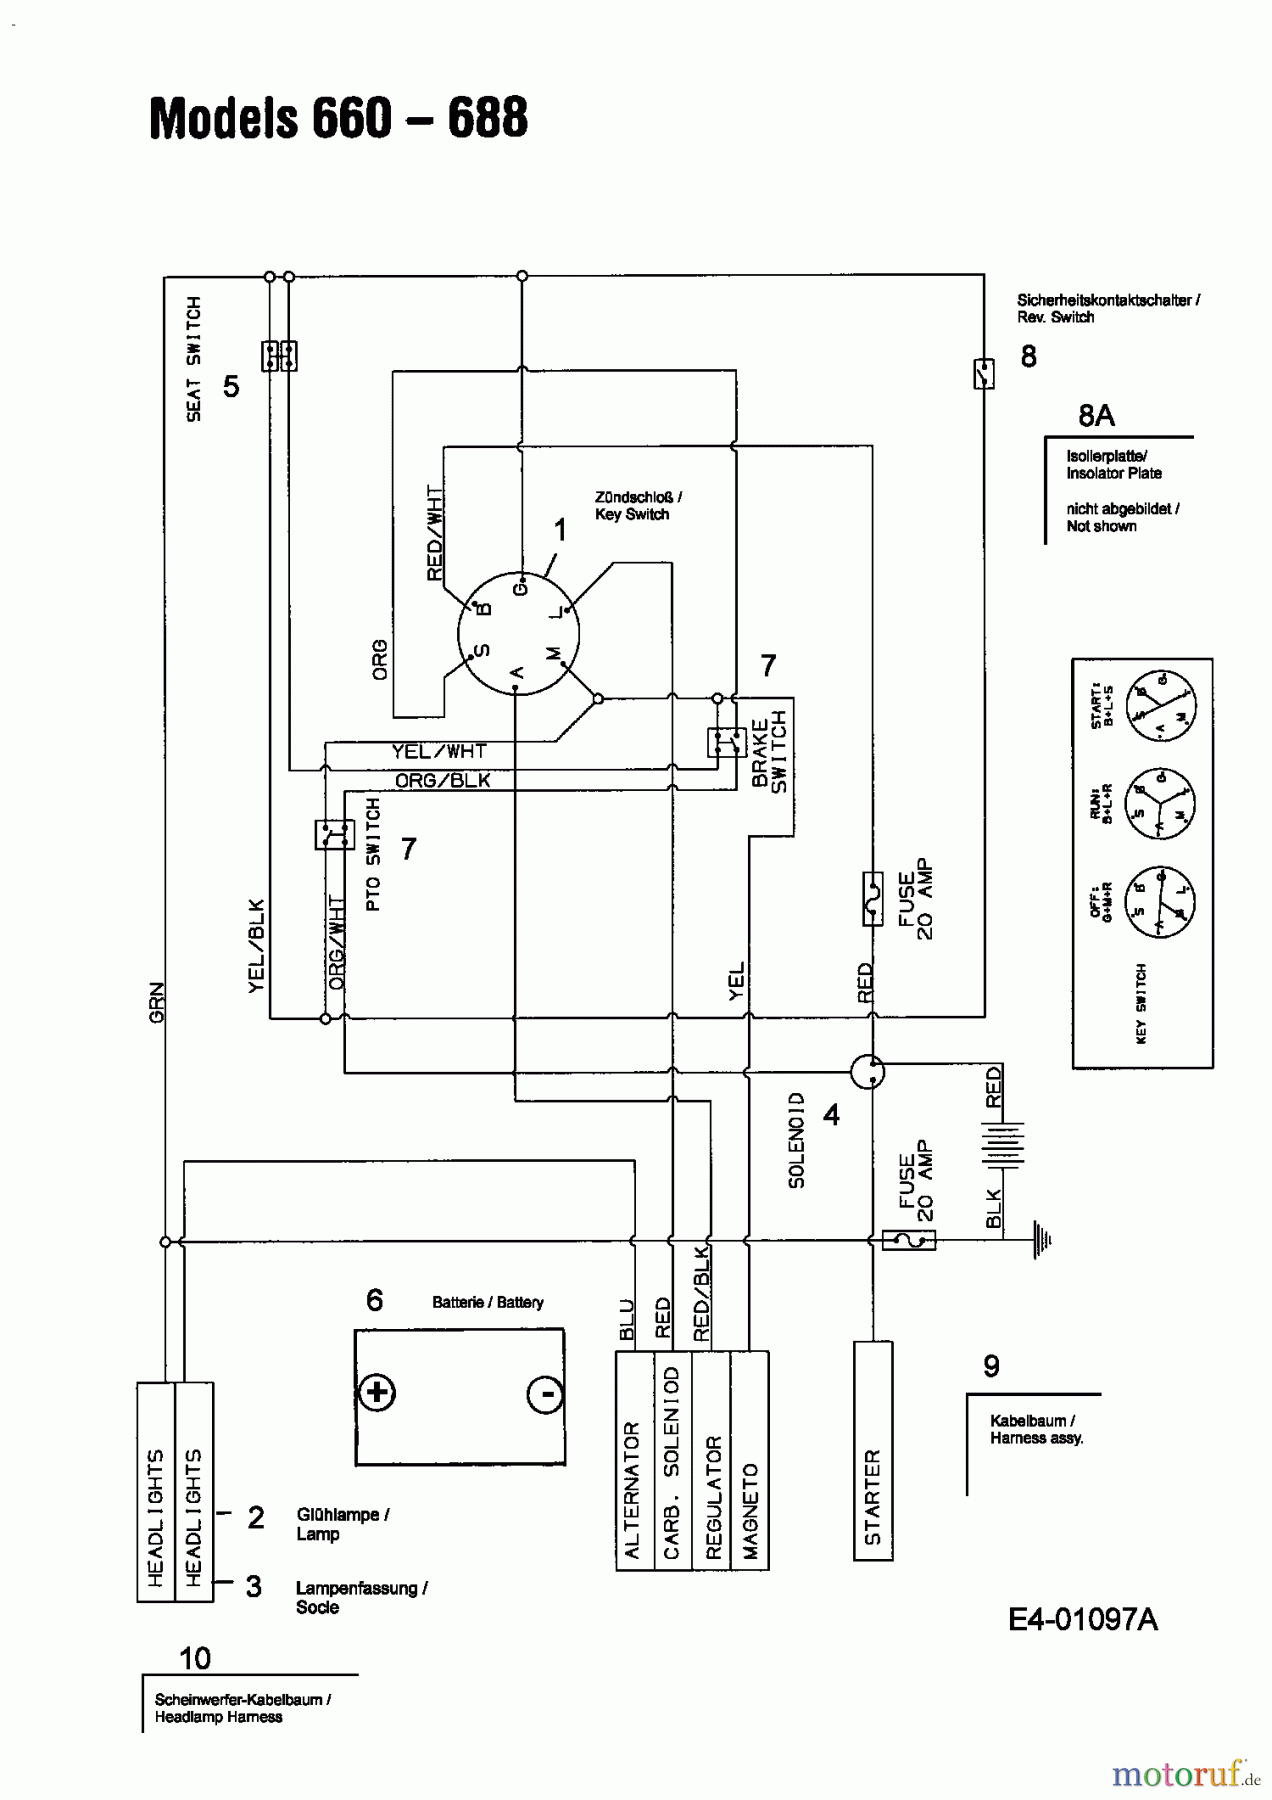  Edenparc Lawn tractors EP 135/96 13AA663F608  (2004) Wiring diagram